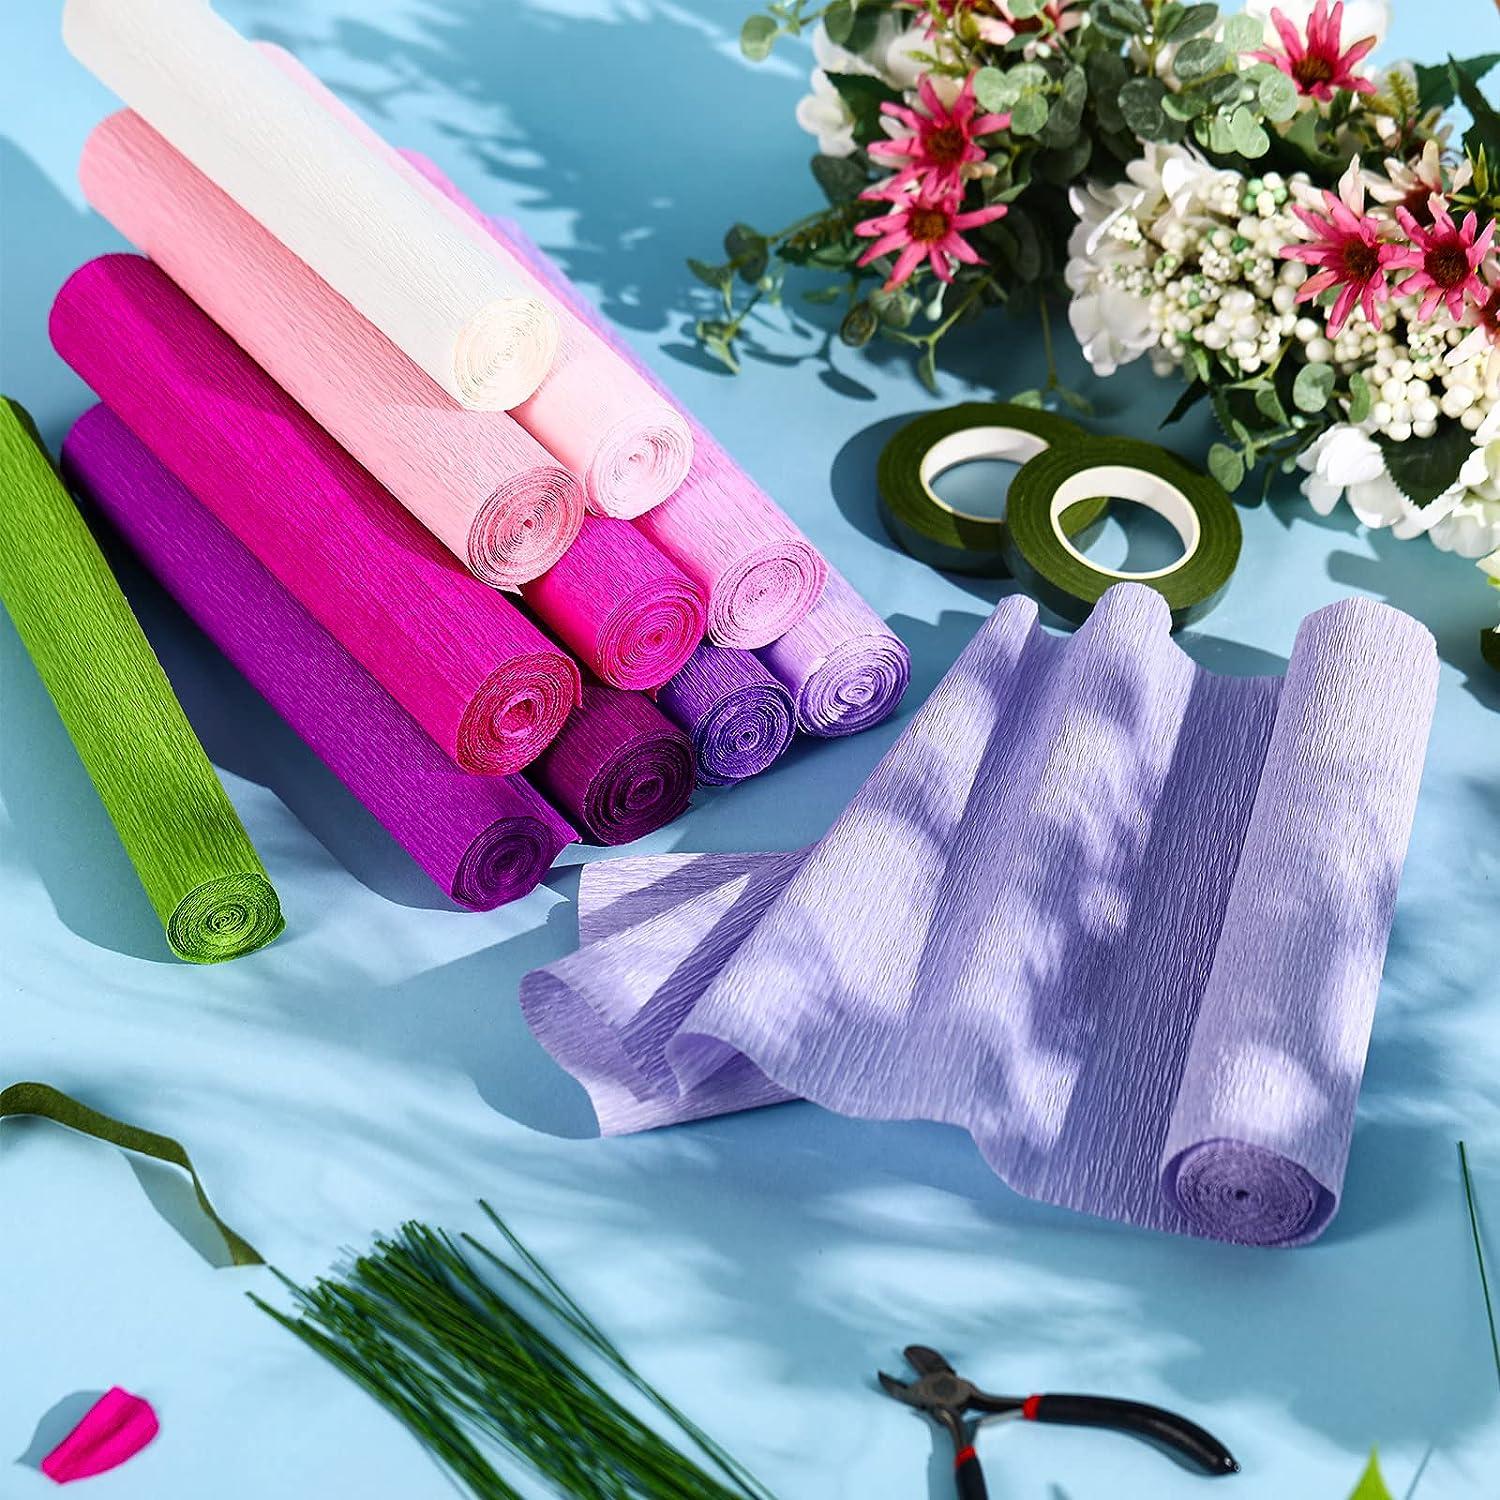 10pcs Craft Crepe Paper Roll Sheets Wrapping Florist Streamers